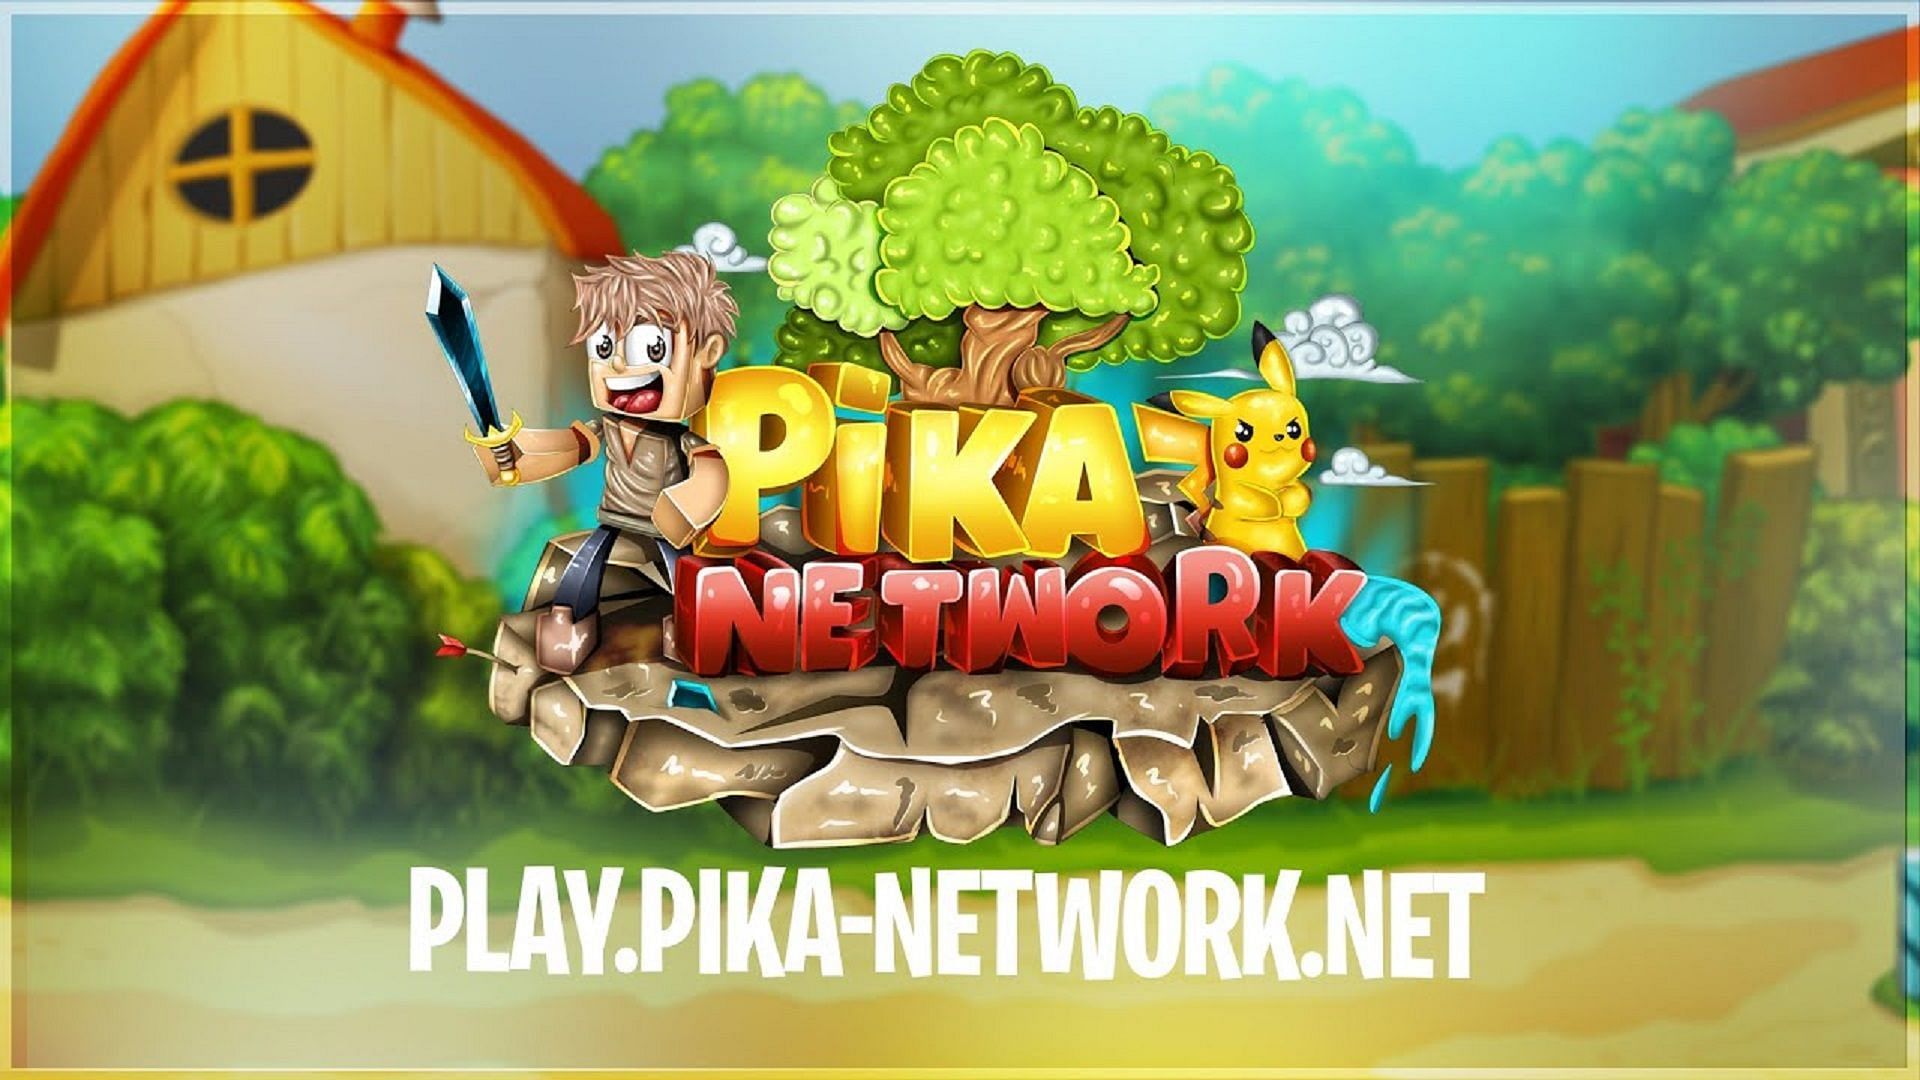 Pika Network's official logo (Image via Pikanetwork/Youtube)